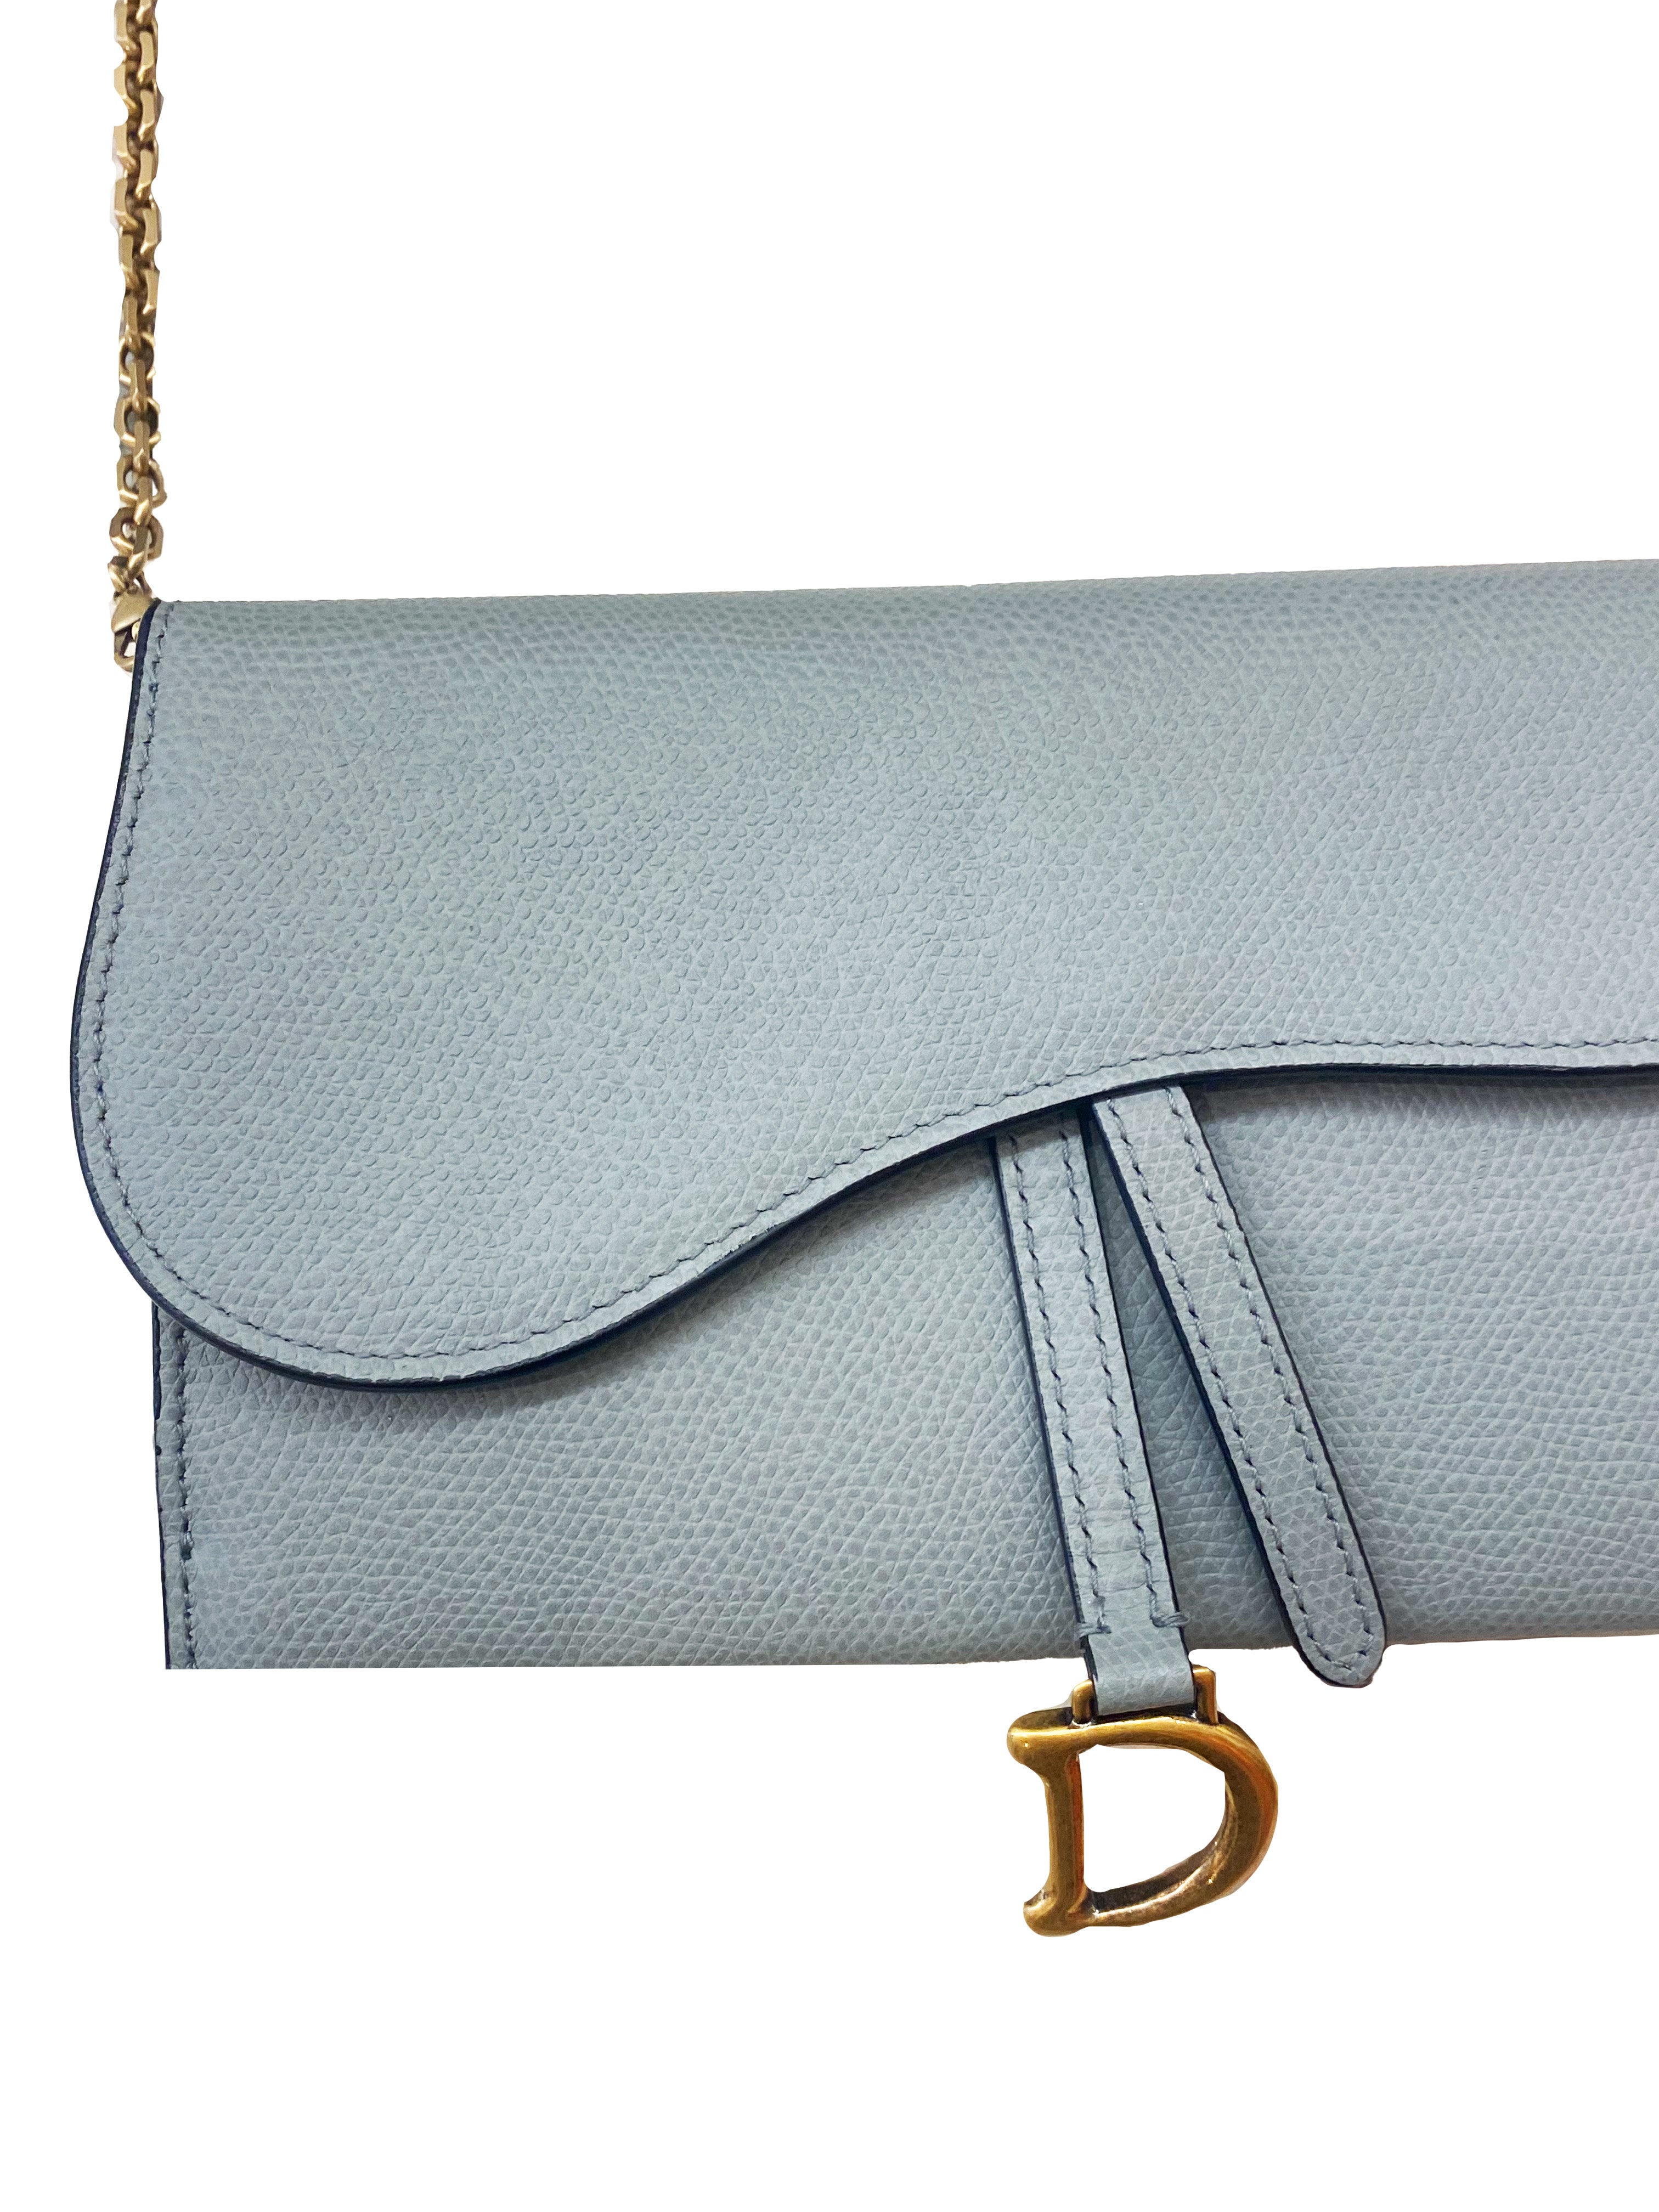 Christian Dior 2020s Saddle Wallet on a Chain